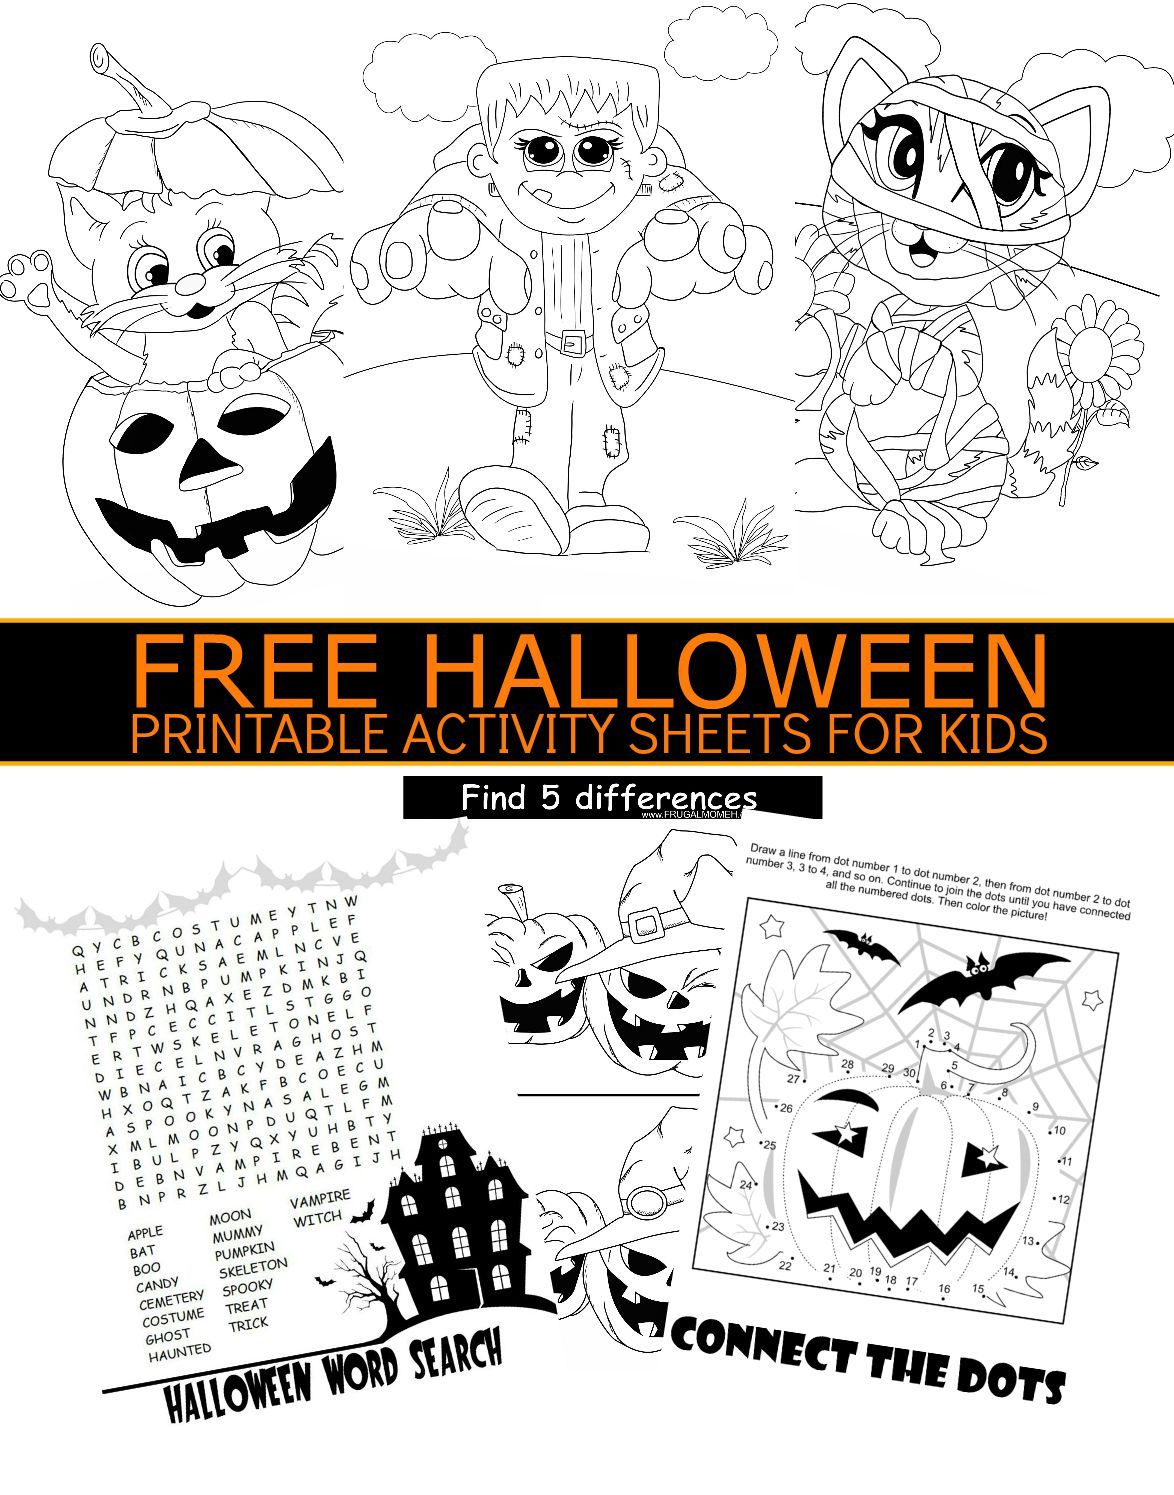 Free Halloween Printable Activity Sheets For Kids | Holidays - Free Printable Halloween Activities